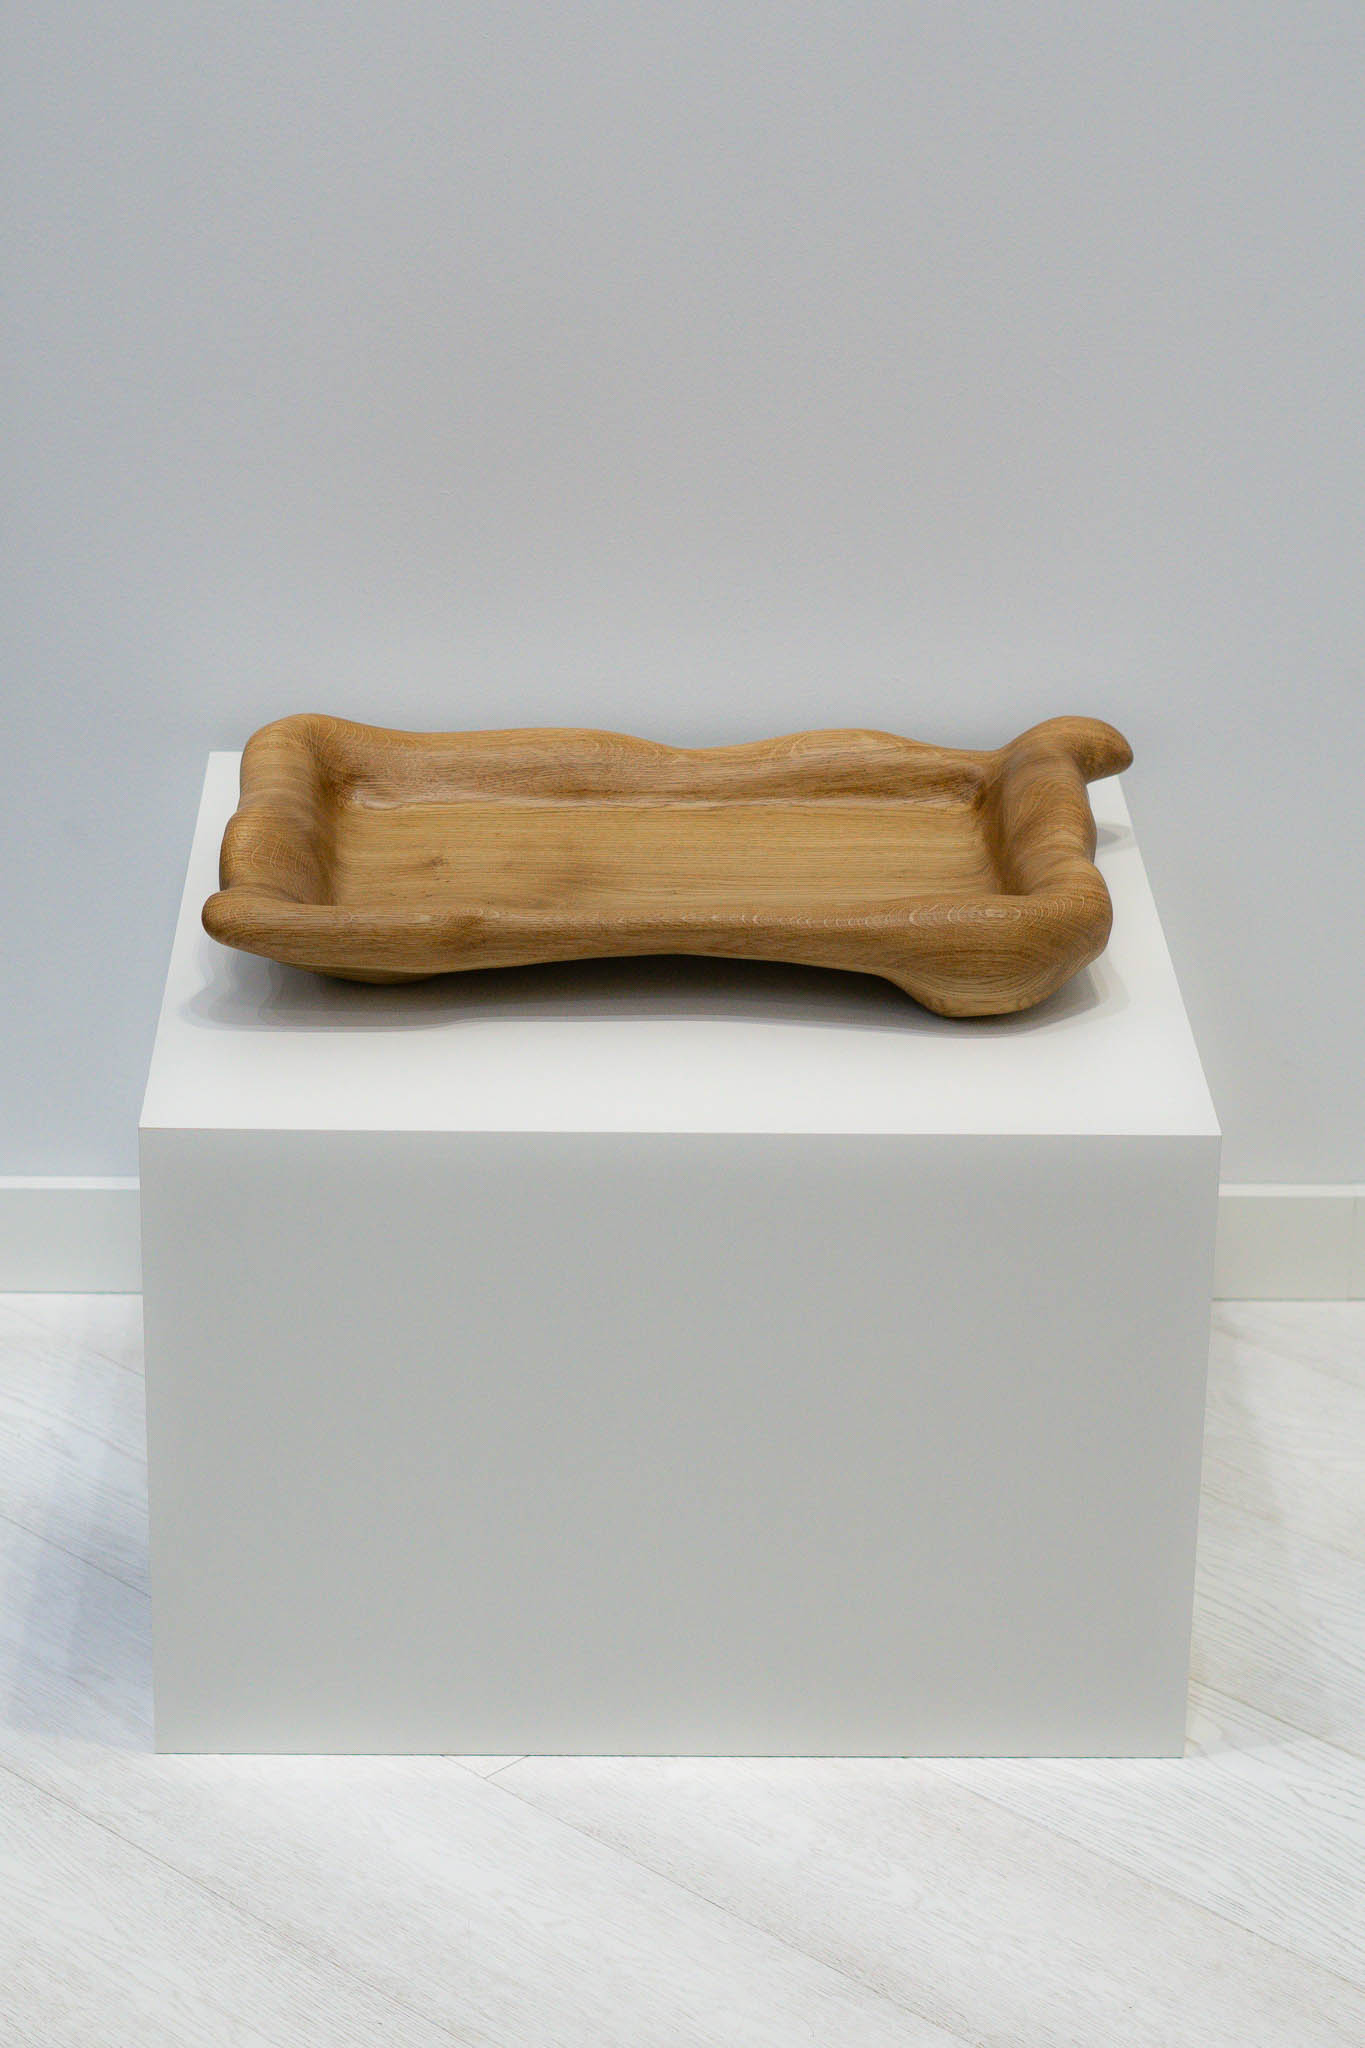 We present to you the sculptural serving tray made from beautiful oak wood